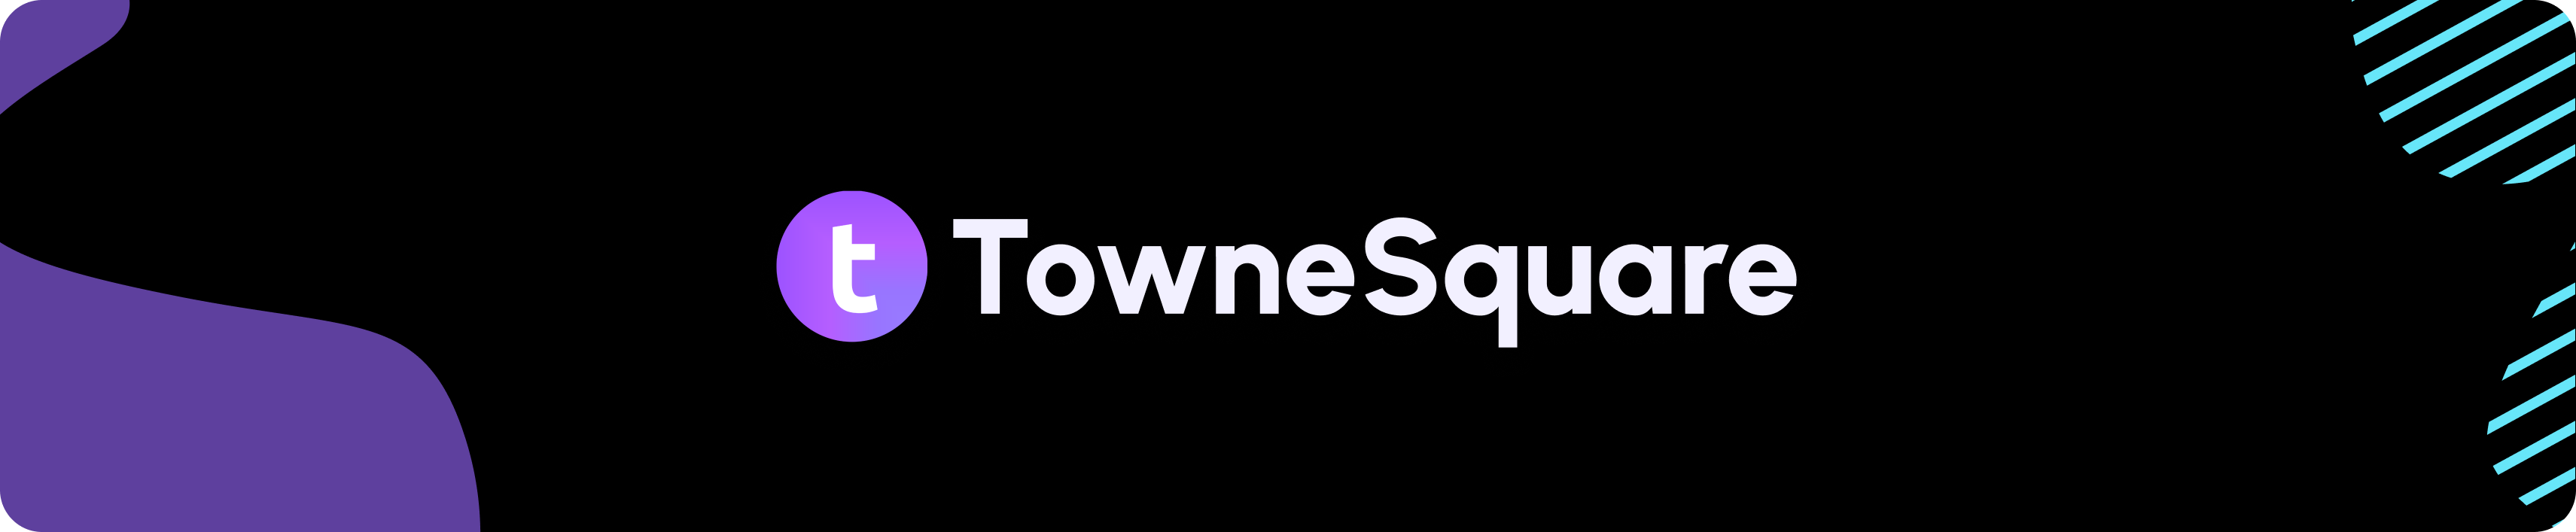 TowneSquare Banner